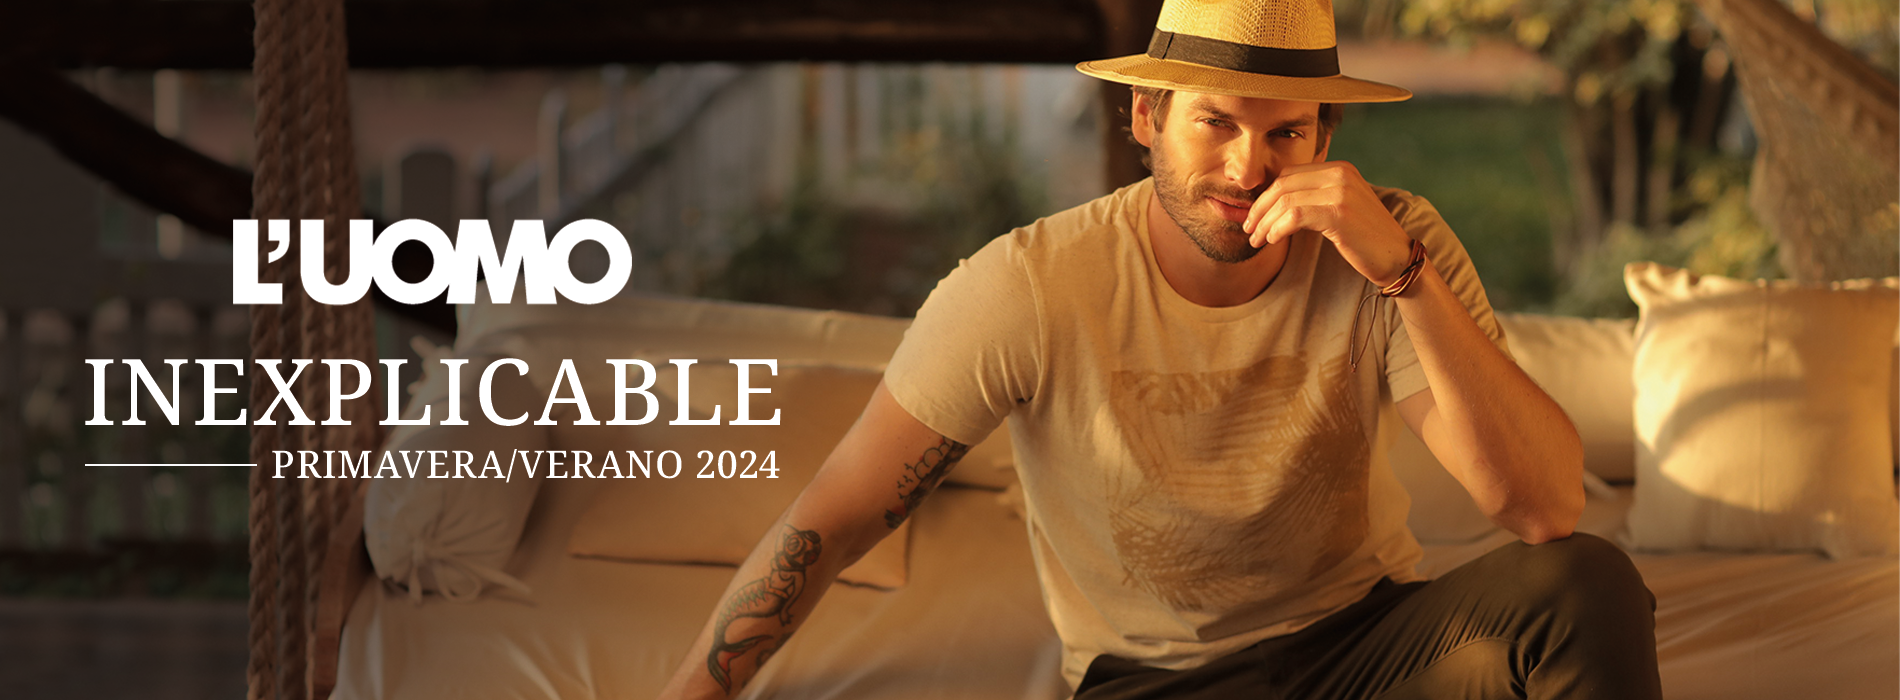 Luomo Inexplicable - Banner web 1900x700px 3